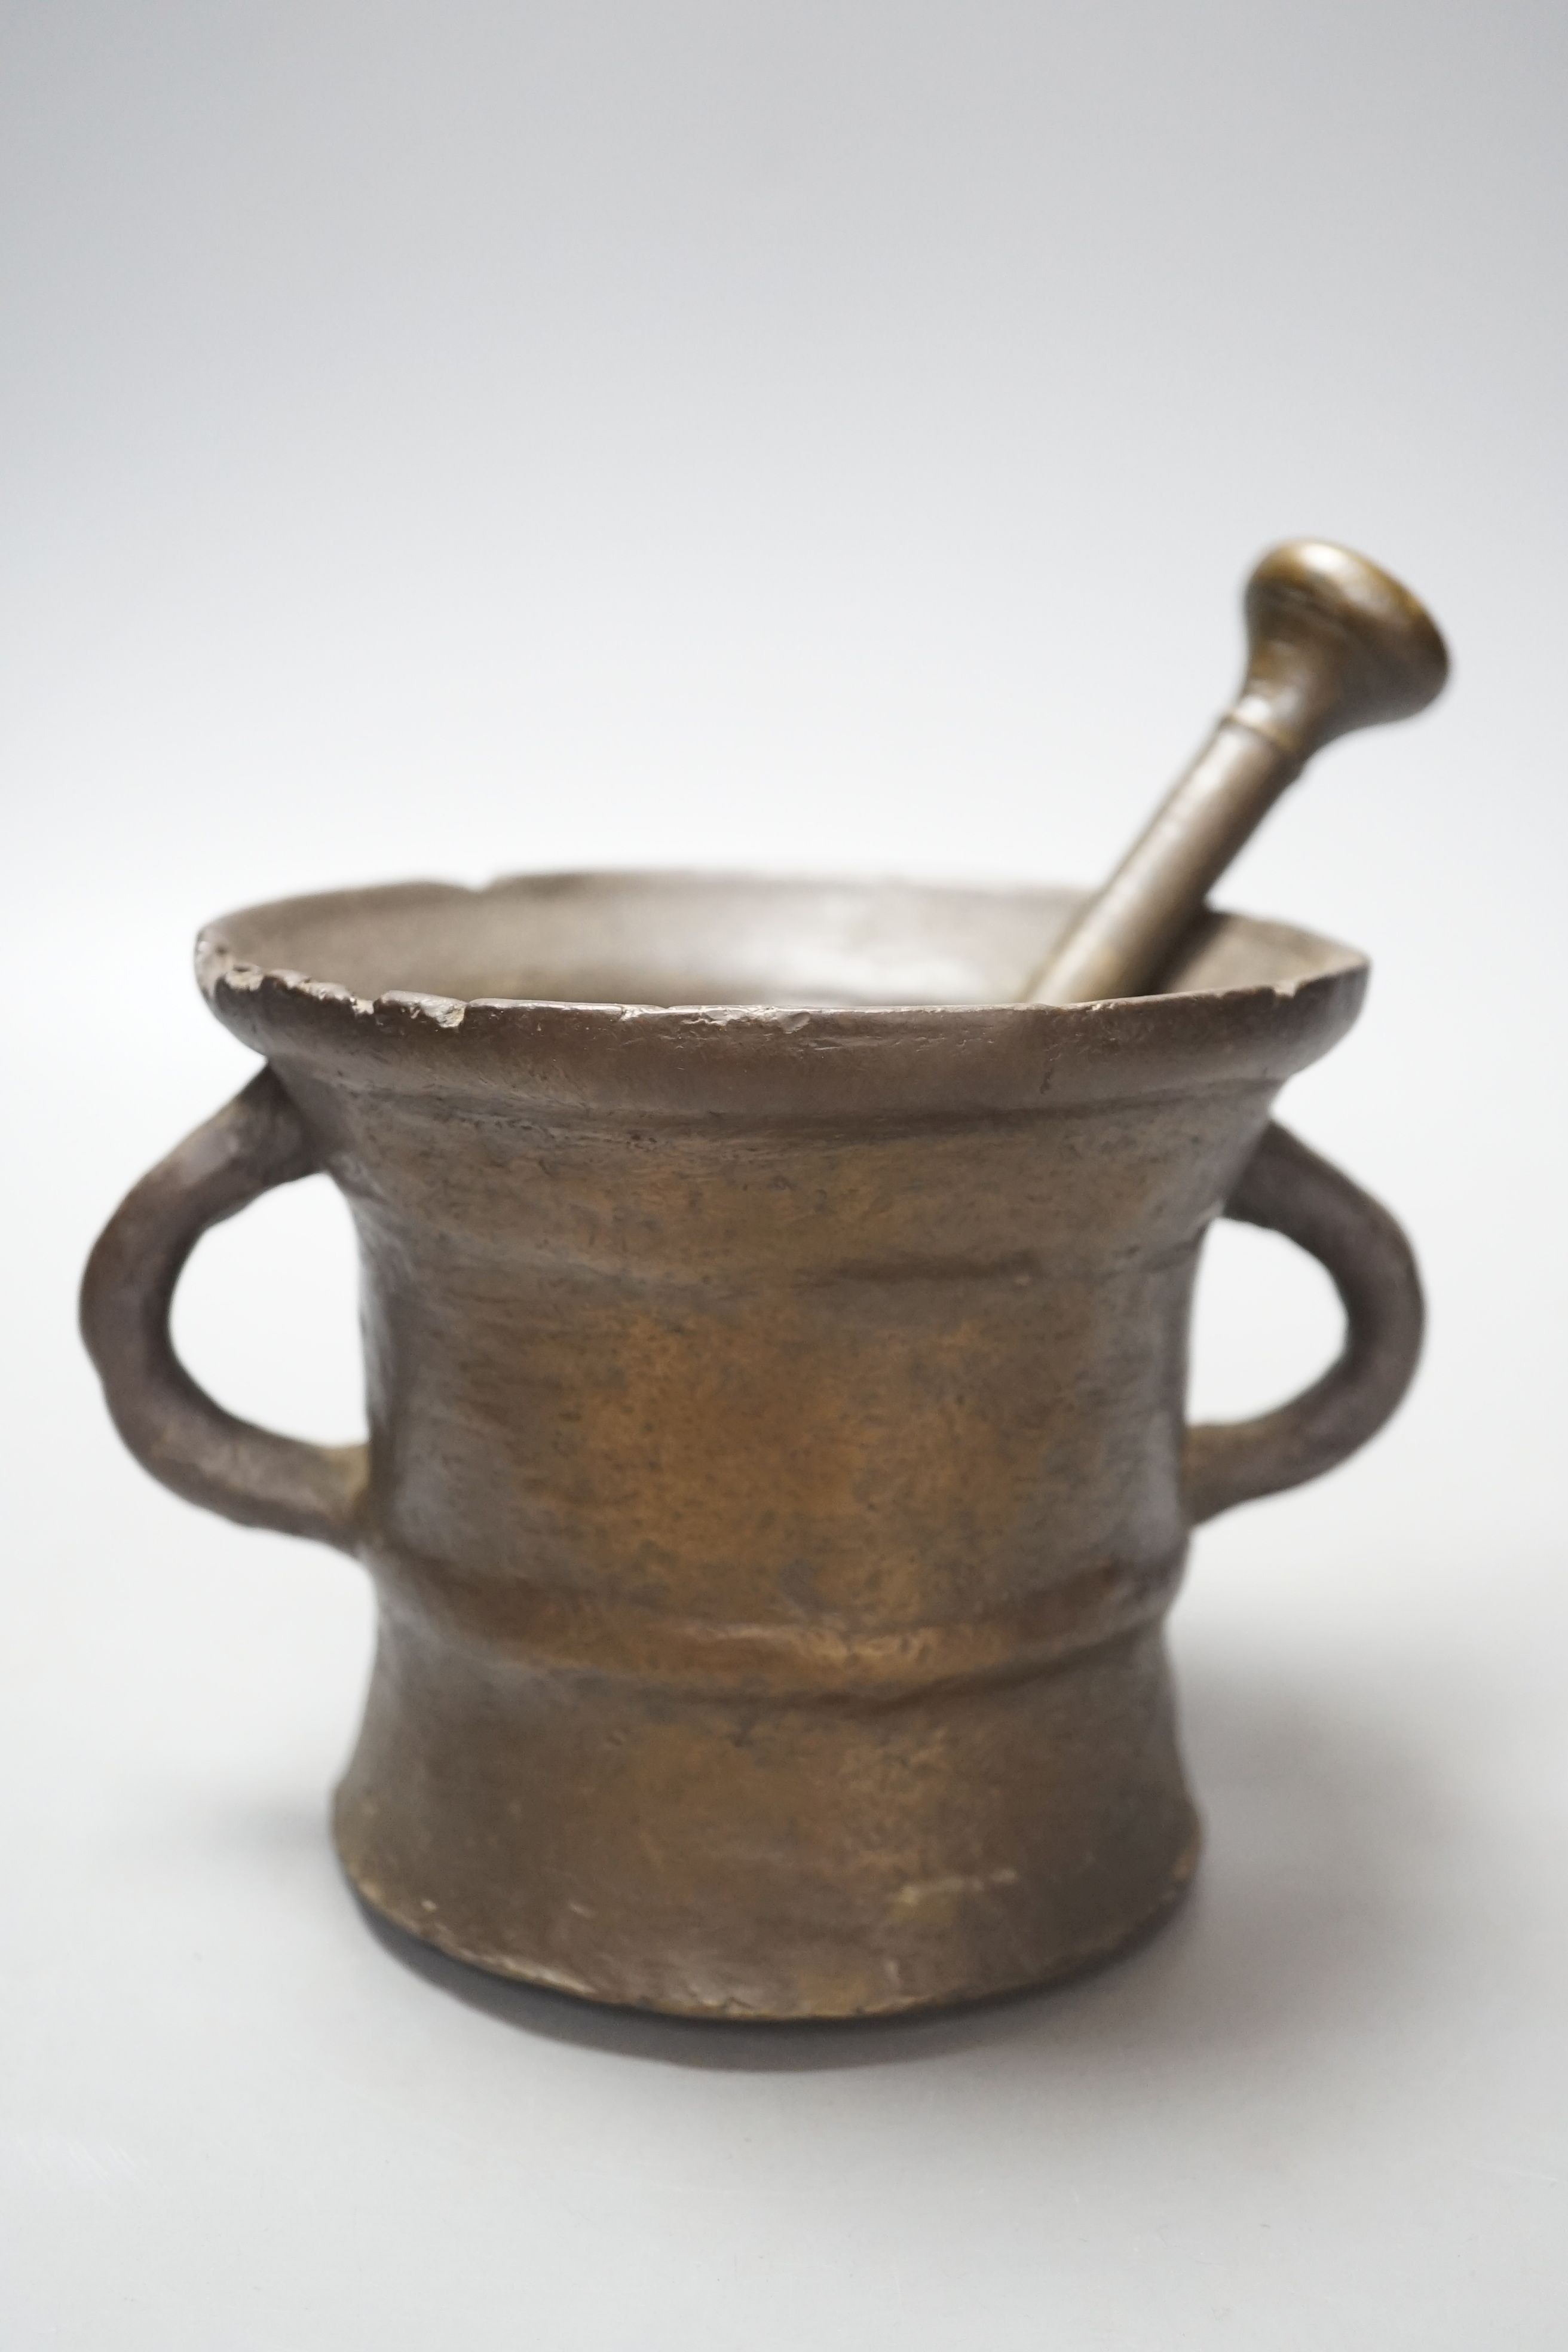 An 18th century bronze pestle and mortar